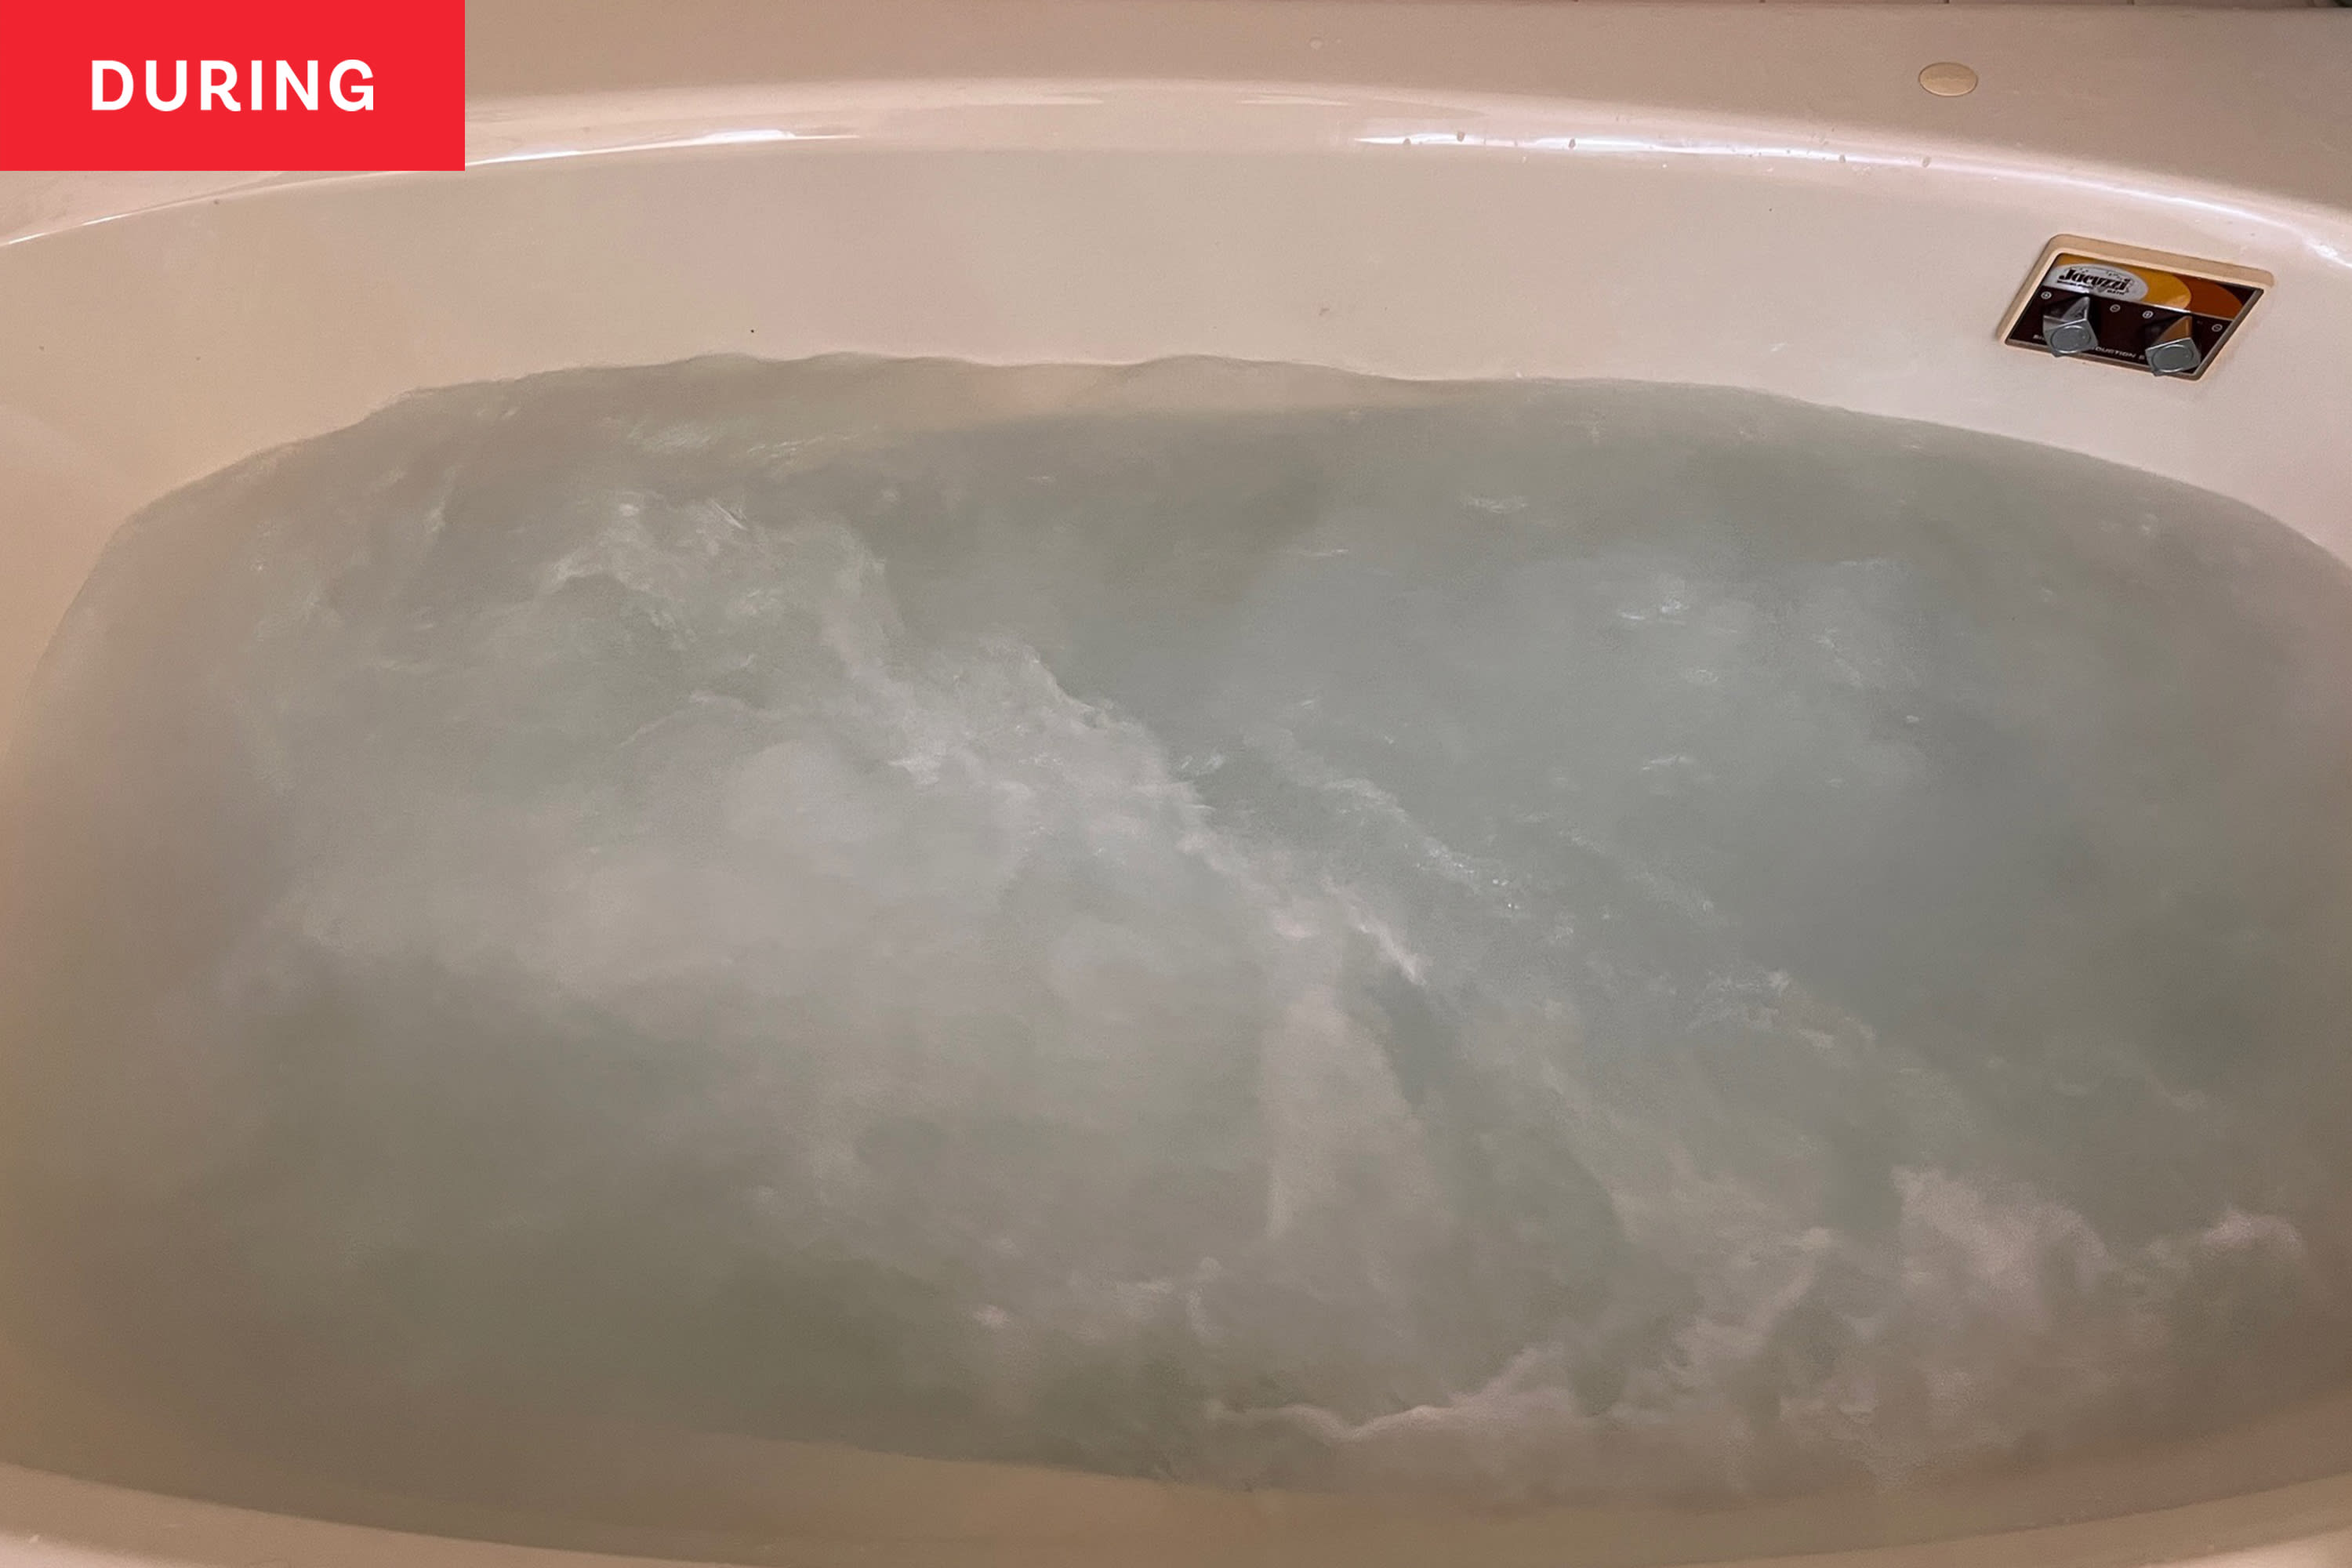 How to Clean a Jetted Tub